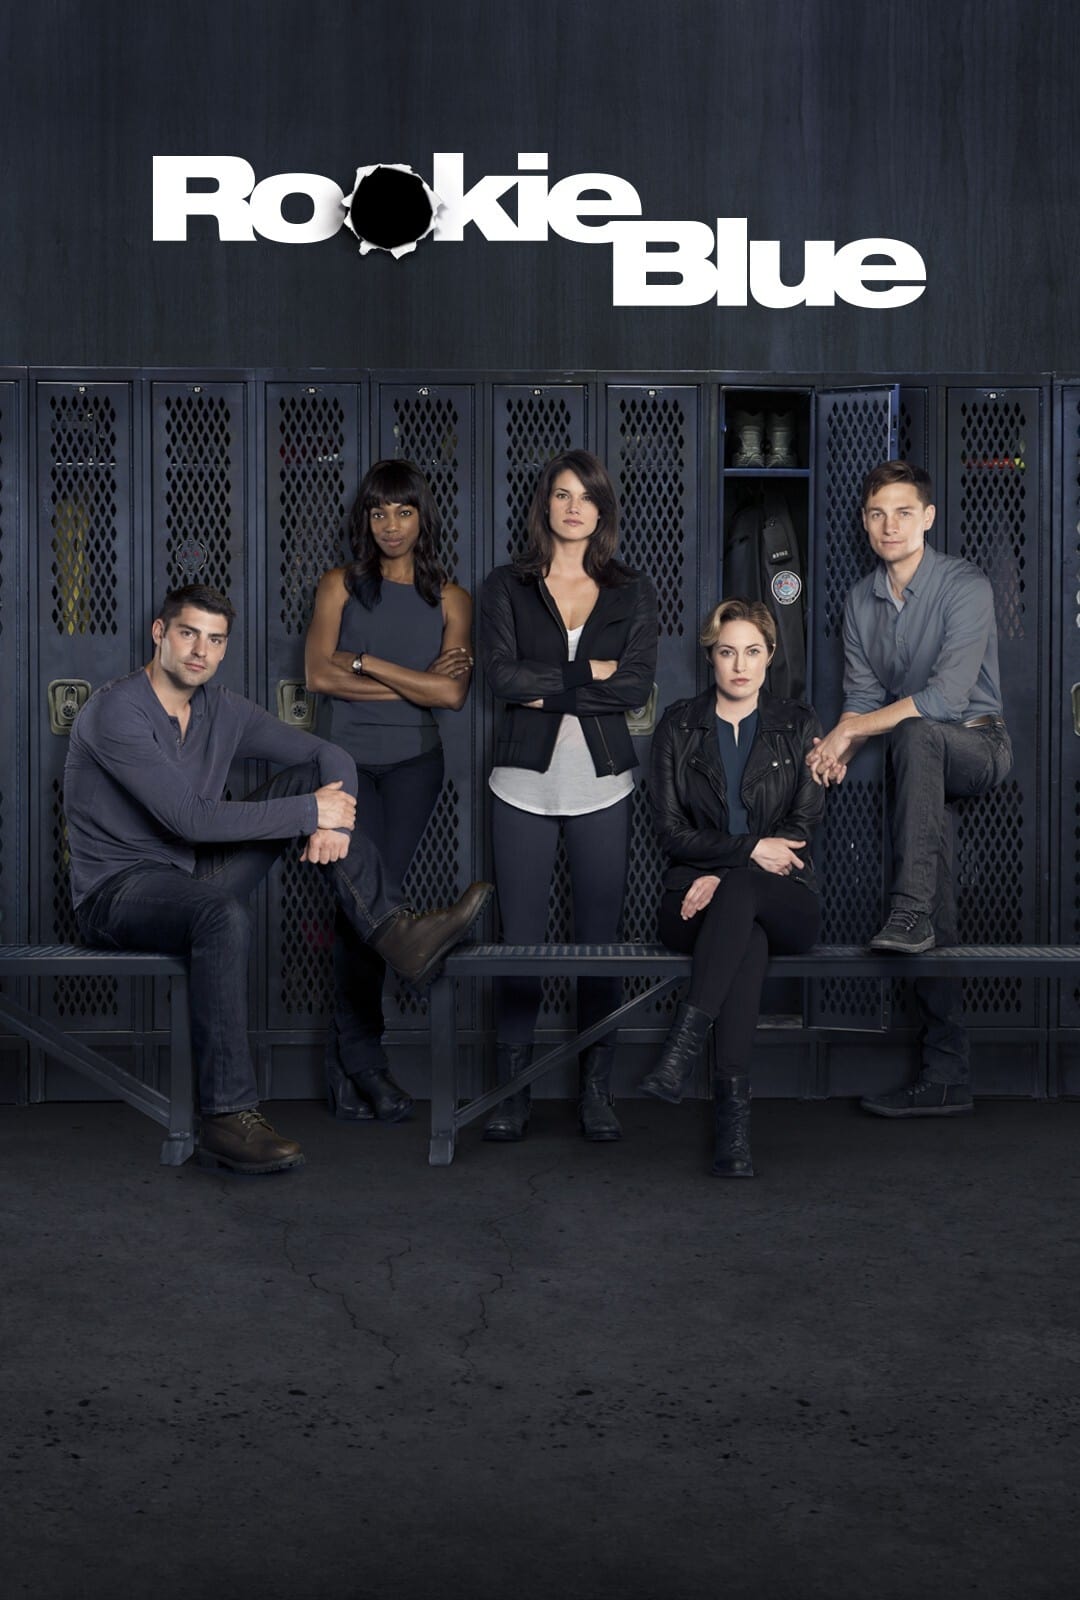 Rookie Blue Picture